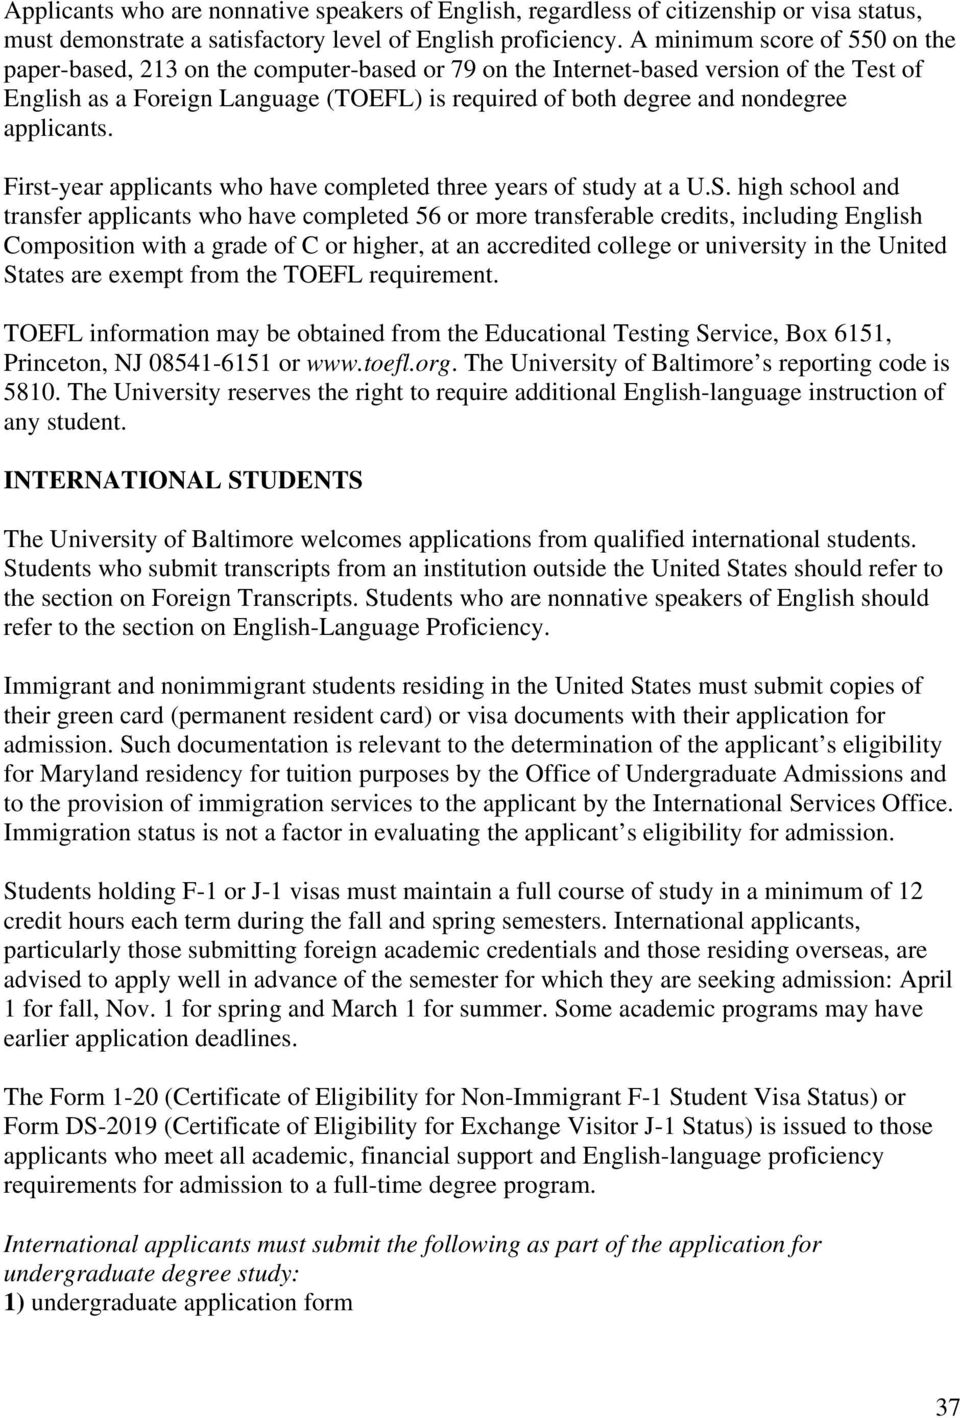 applicants. First-year applicants who have completed three years of study at a U.S.